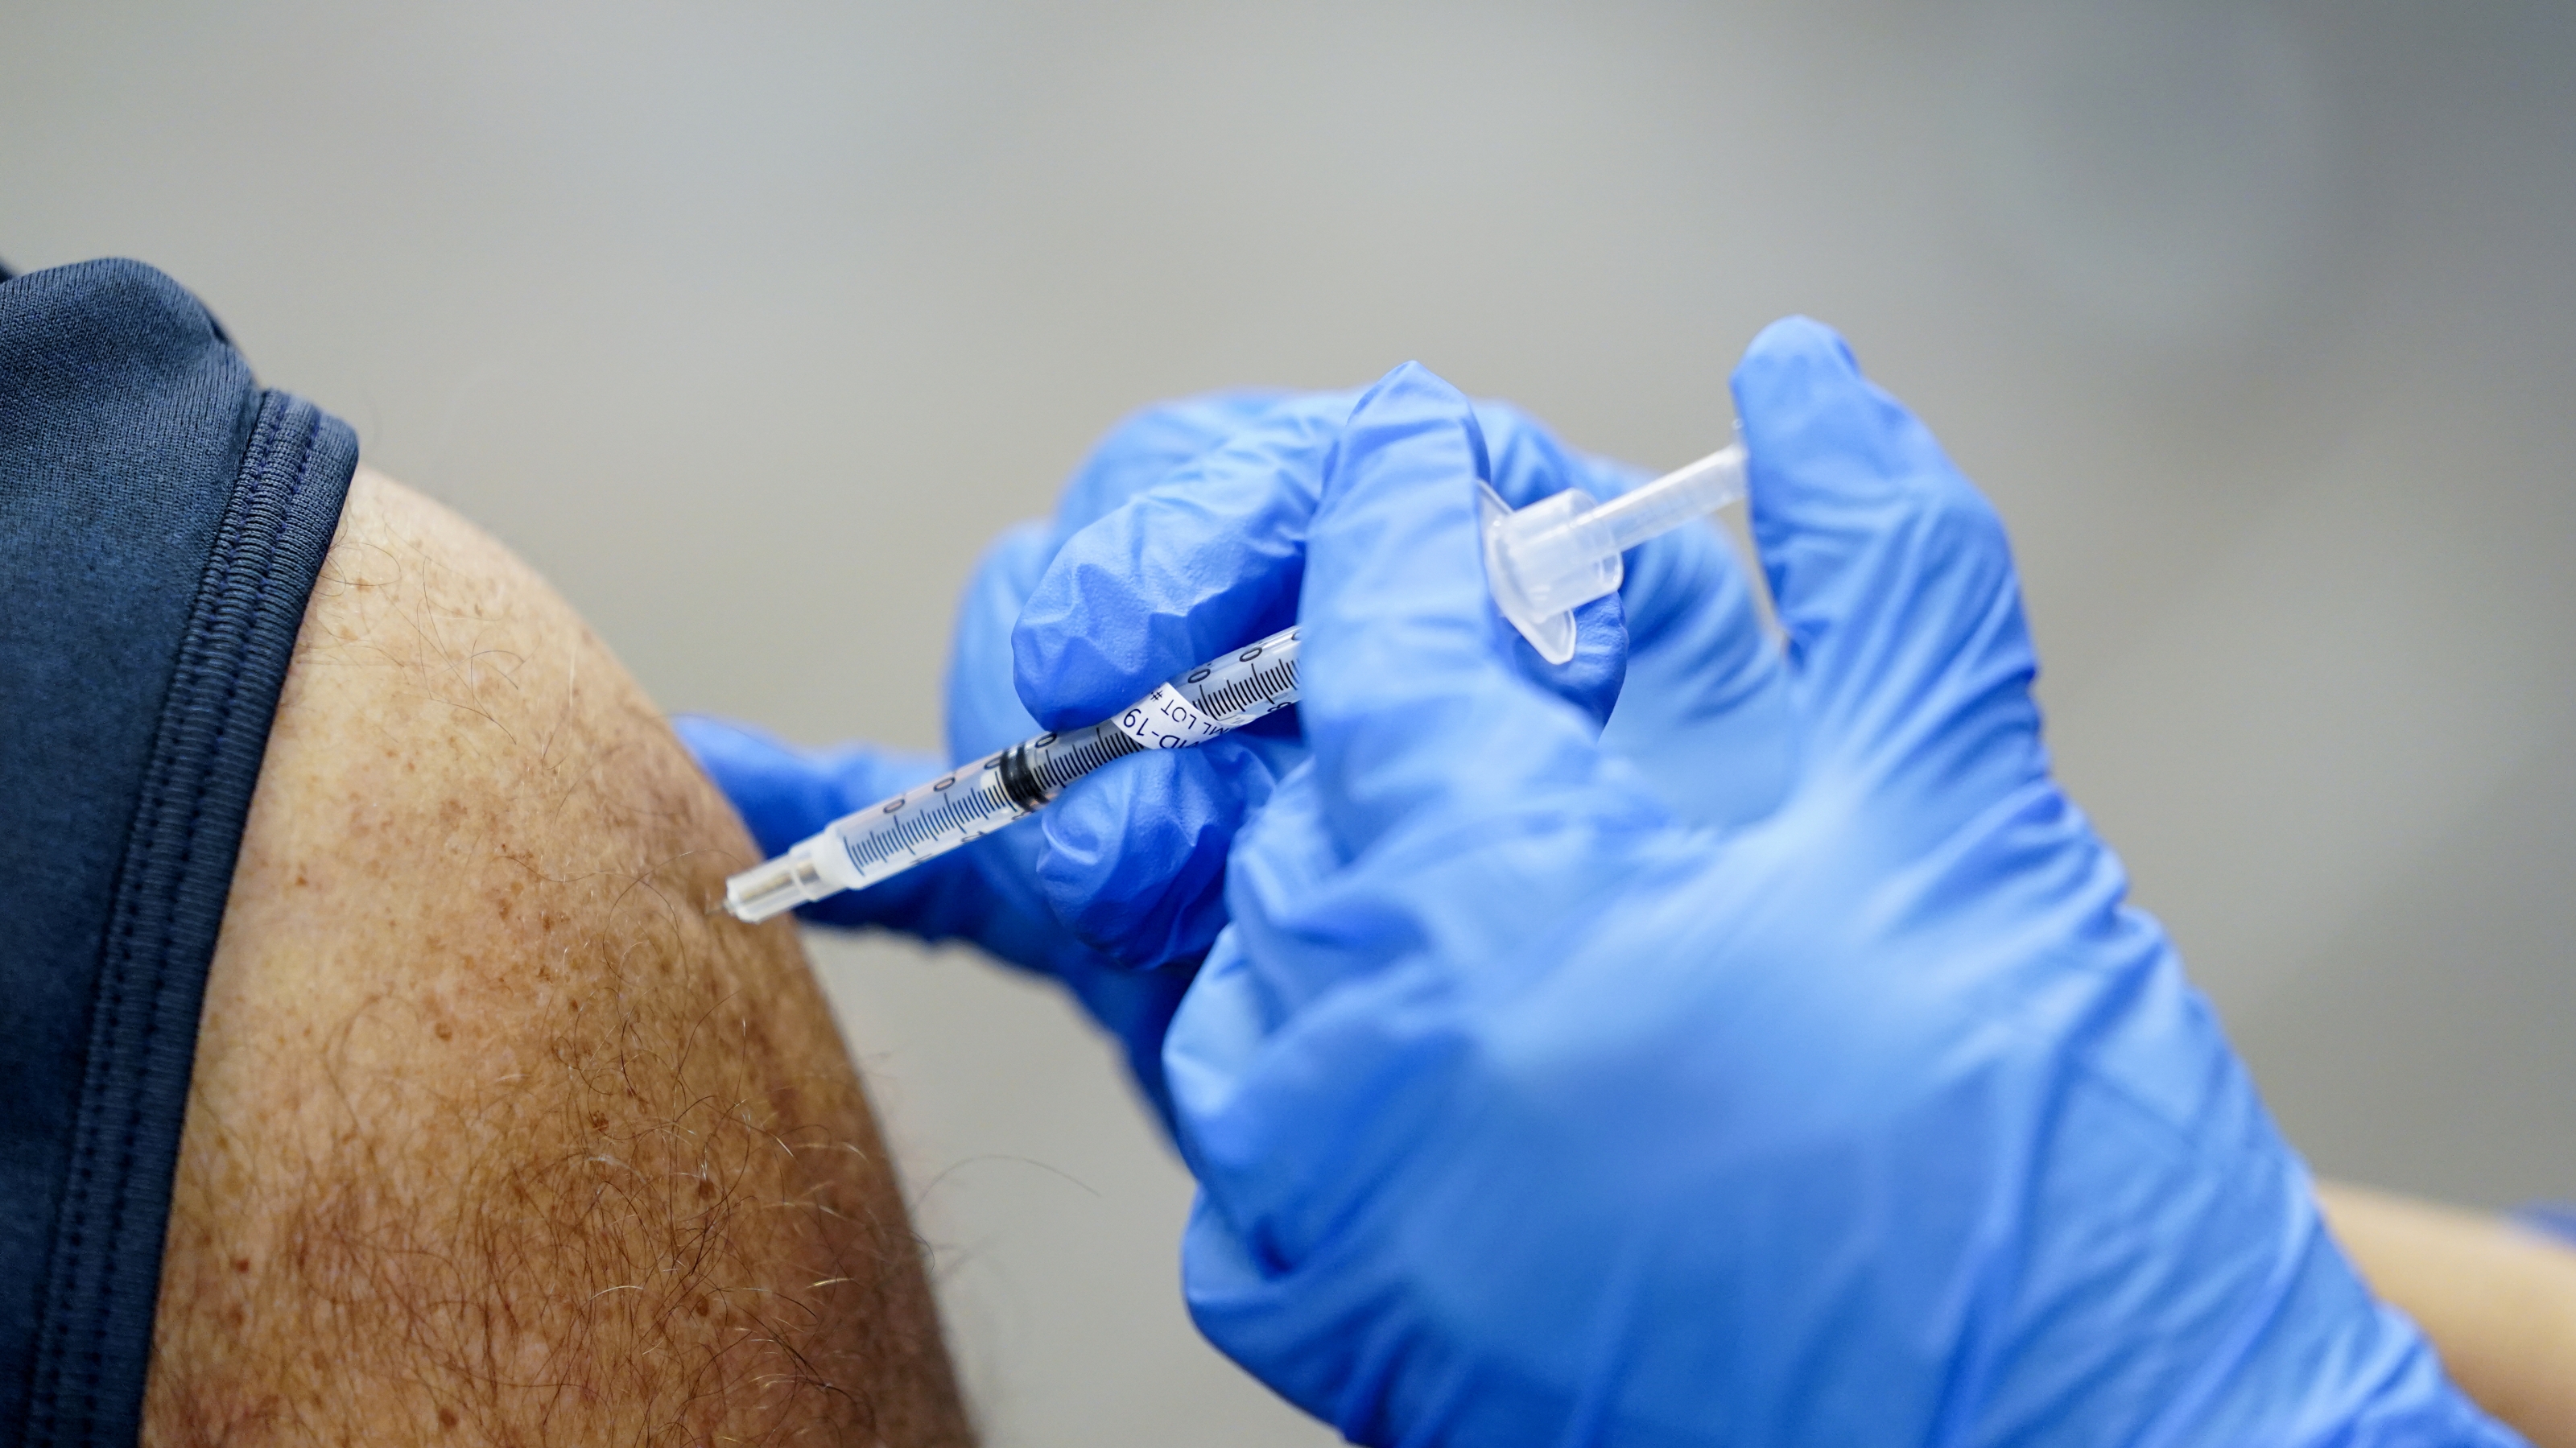 ‘Chaos and confusion’ in the deployment of vaccines begs the question: What is fair?